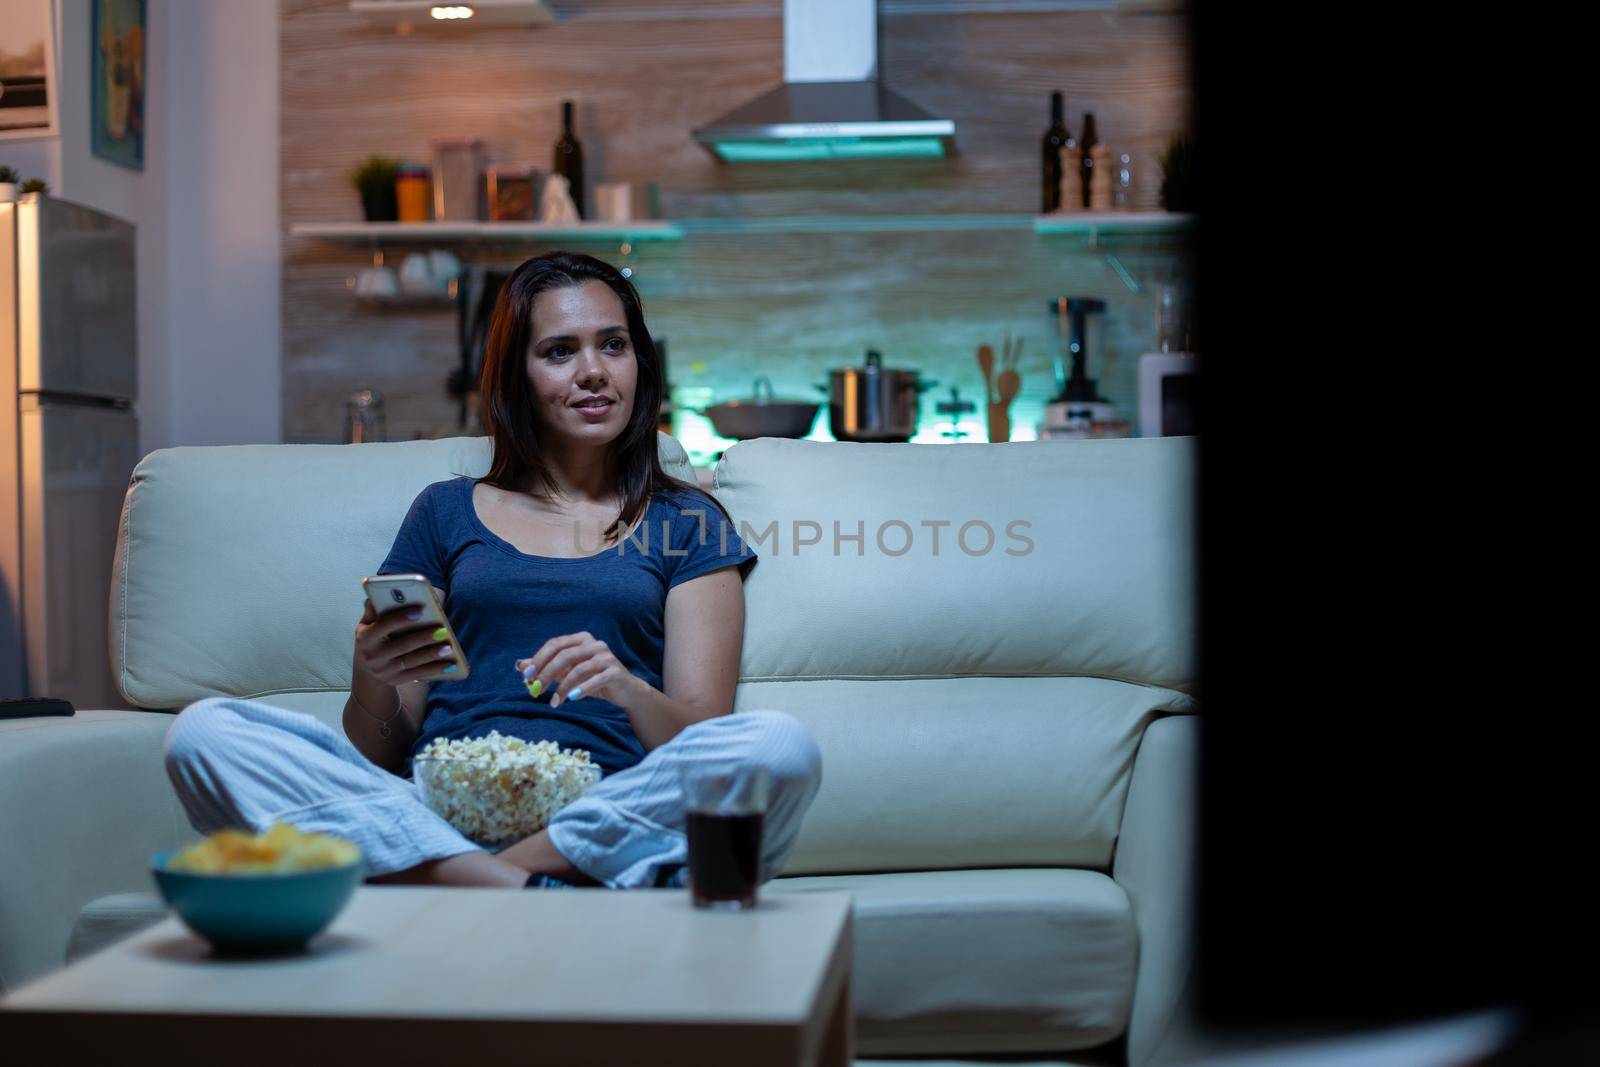 Young lady relaxing at night using phone and watching tv sitting on sofa. Lonely amused happy woman reading, writing, searching, browsing on smartphone laughing amusing using technology internet